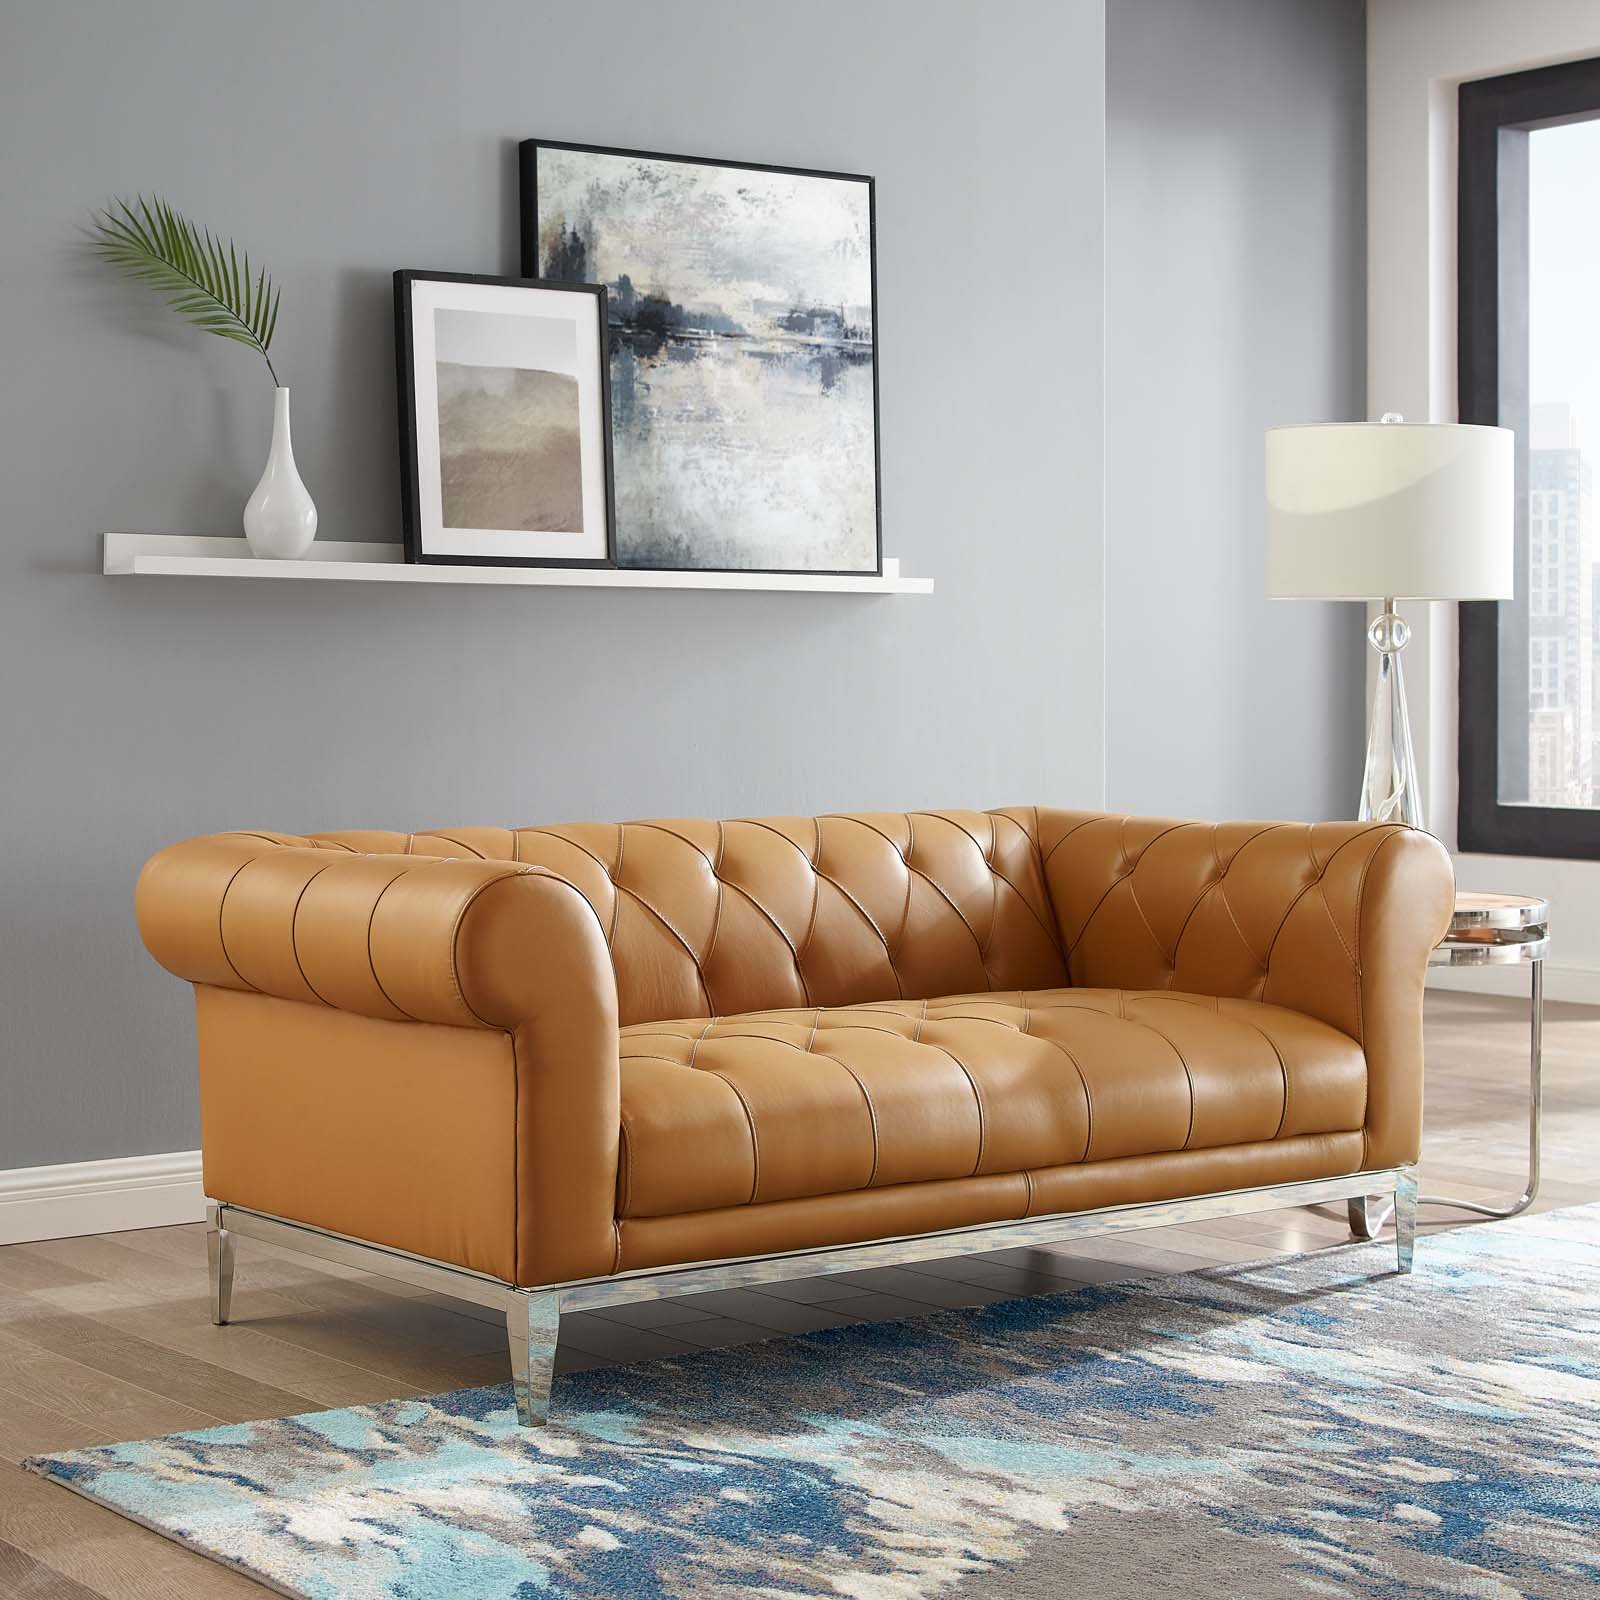 On Tufted Leather Upholstered Tan, Chesterfield Loveseat Brown Leather